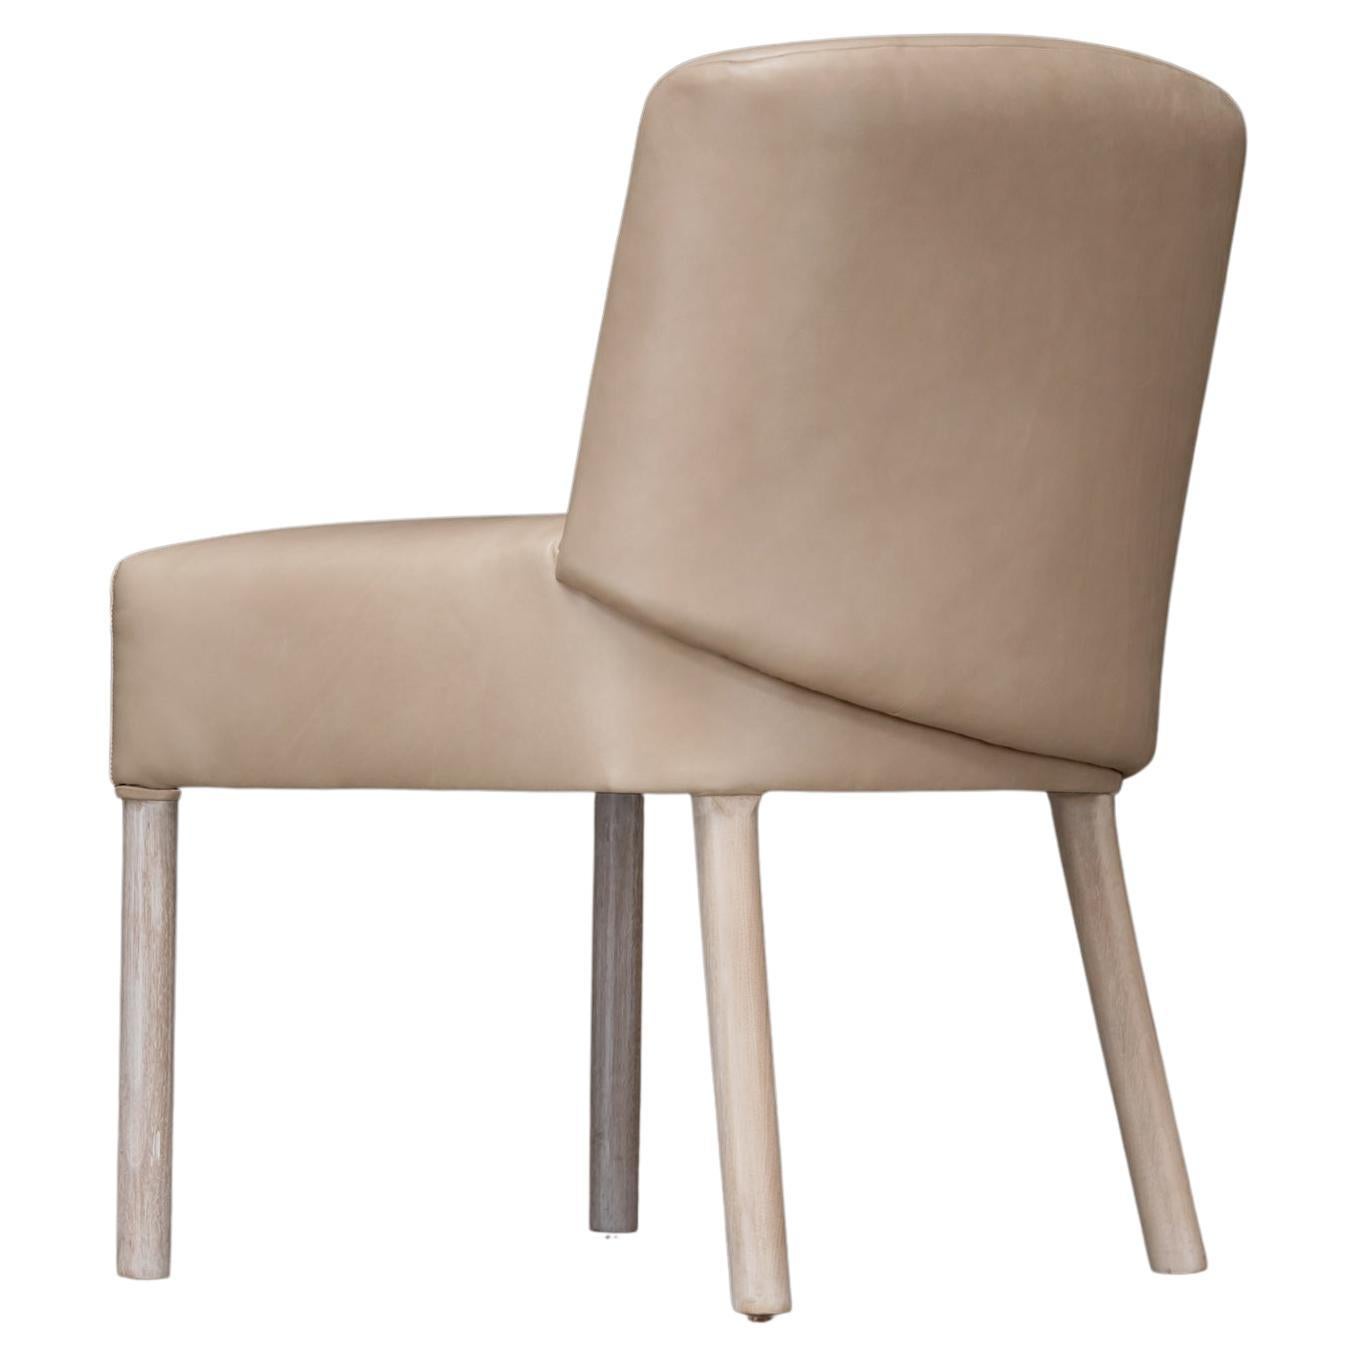 CURVE DINING CHAIR - Modern Sculpted Low Back Design in COM